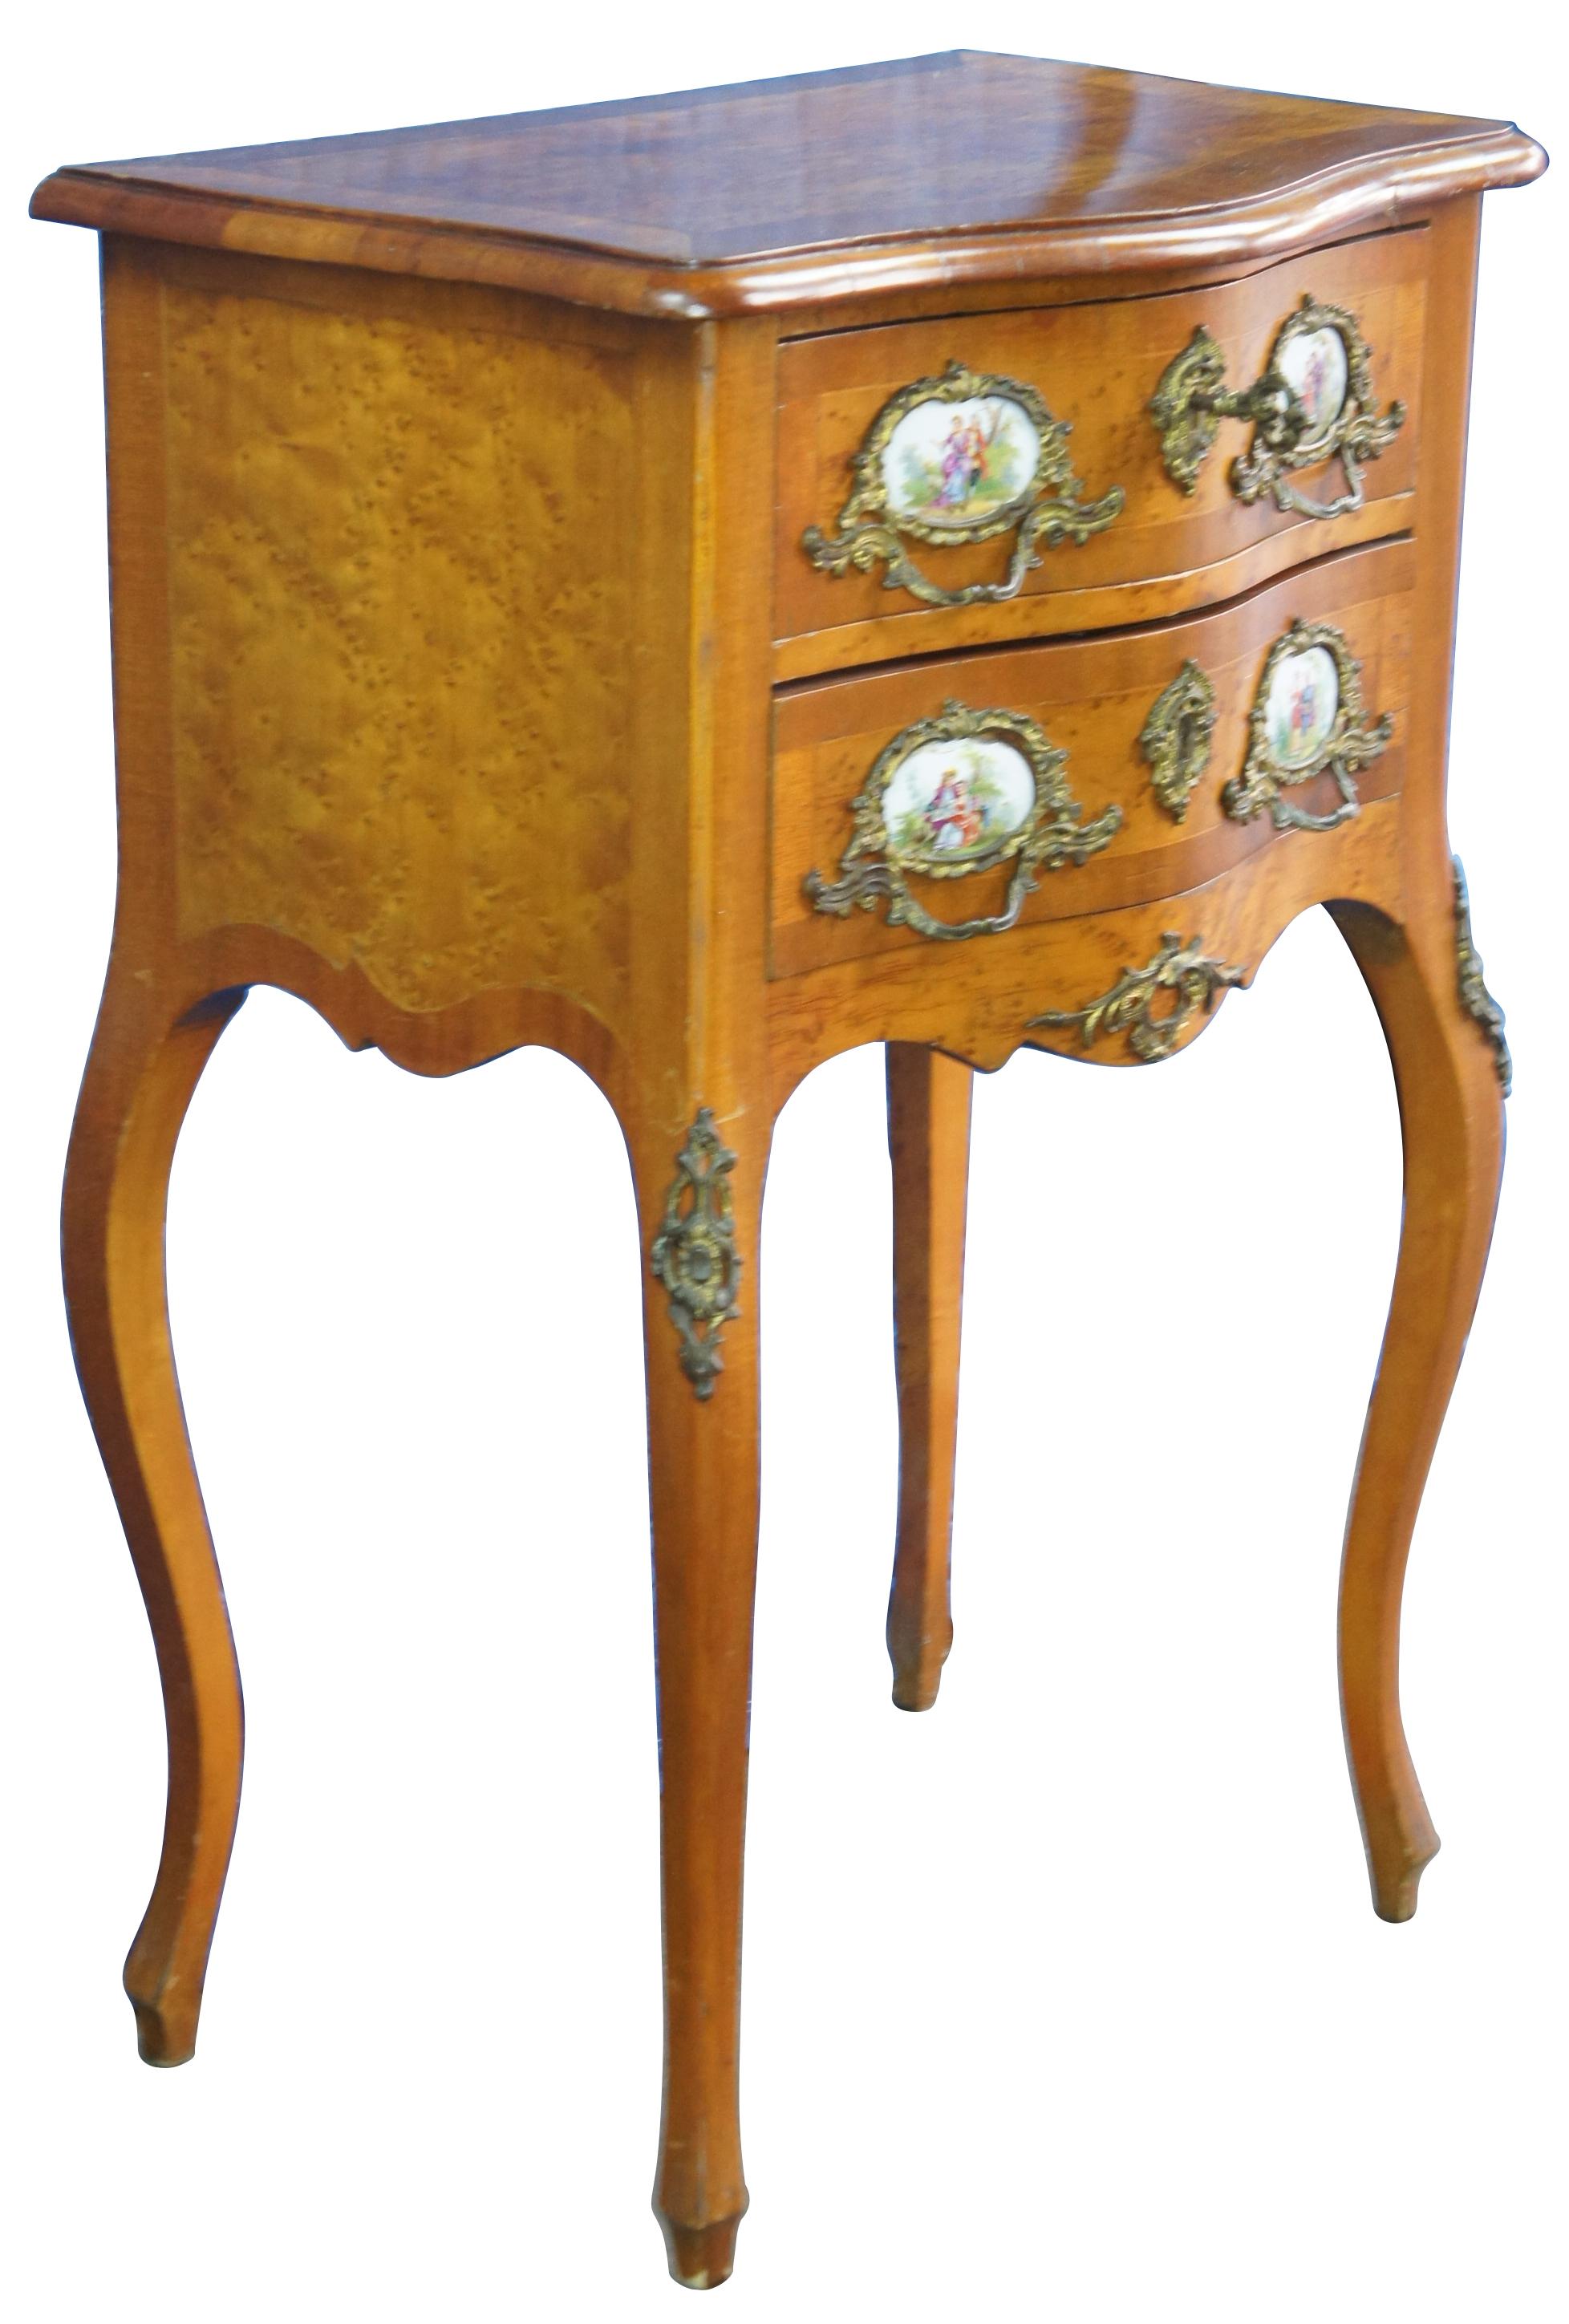 Antique French Louis XV / Napoleon III 2 drawer nightstand or chest, circa last half 19th century. Made of walnut and birdseye featuring serpentine form with two dovetailed drawers, bronze ormolu and classical painted porcelain sevres style plaques